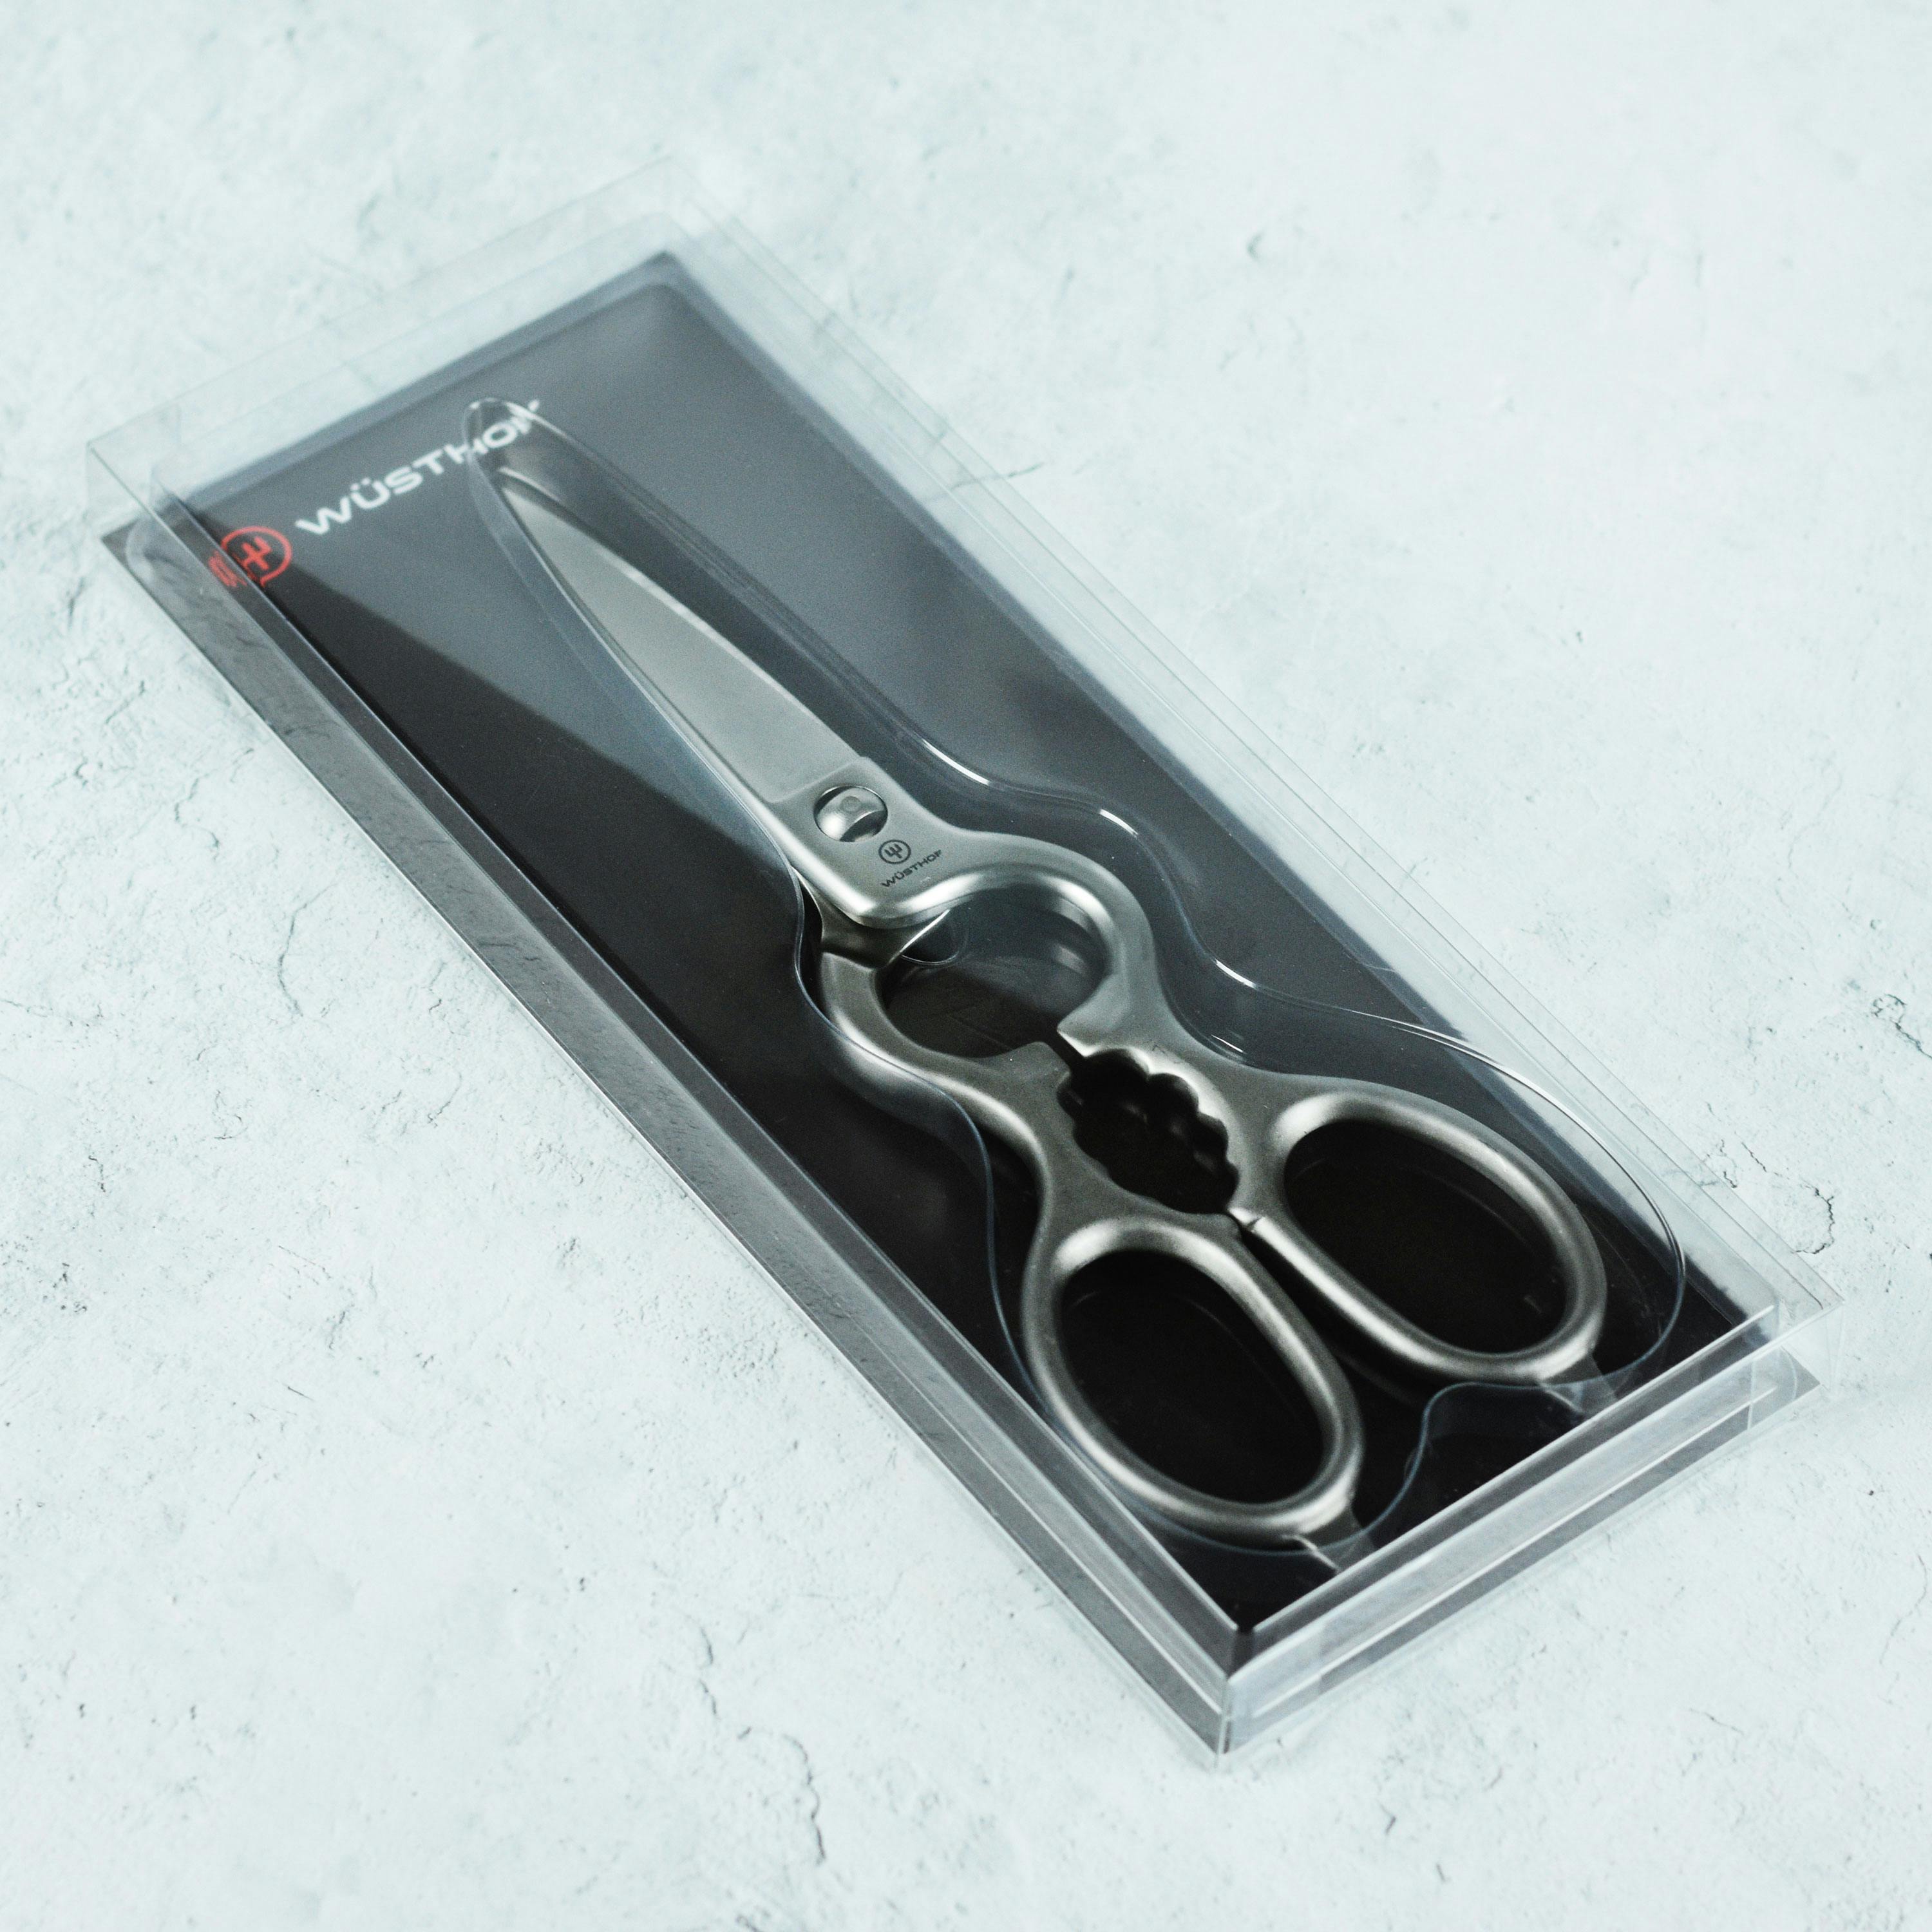 WÜSTHOF Shears 8 1/2 Come-Apart Kitchen Shear, Stainless